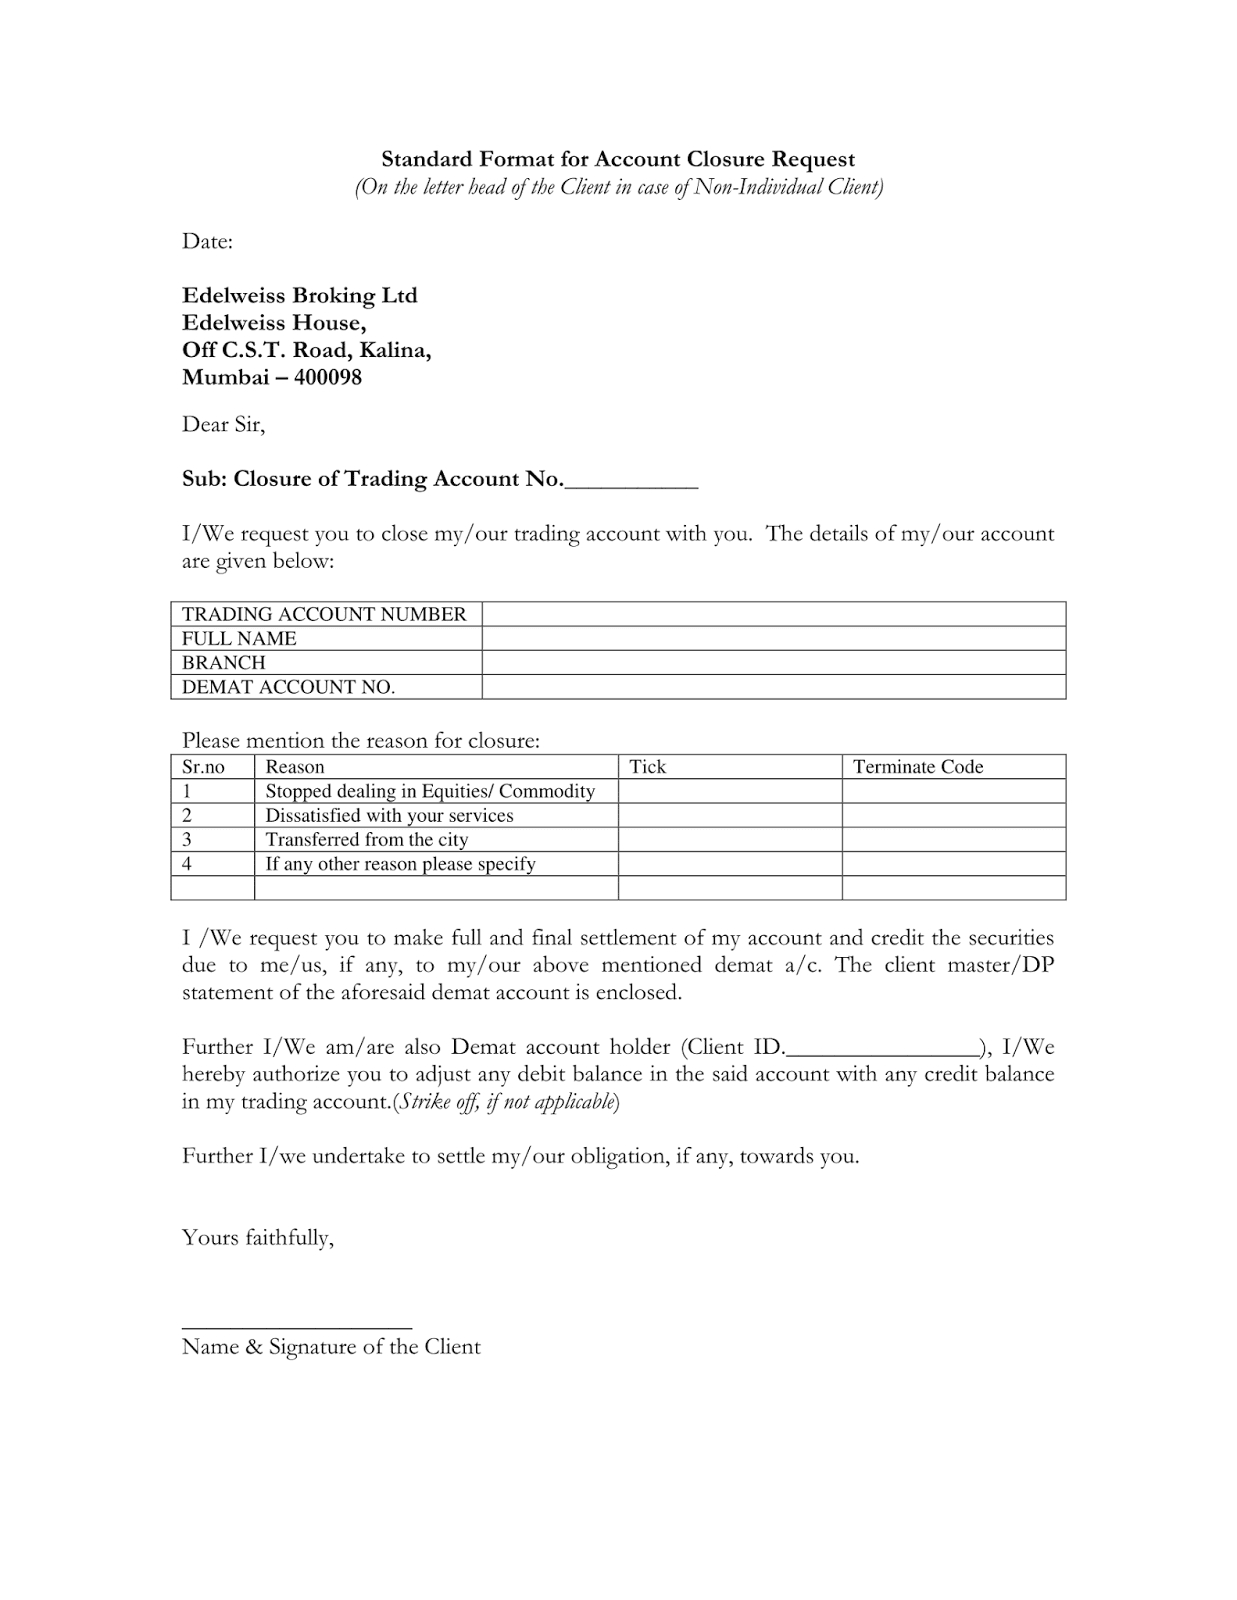 Bank Account Closing Letter - Scribd India inside Account Closure Letter Template